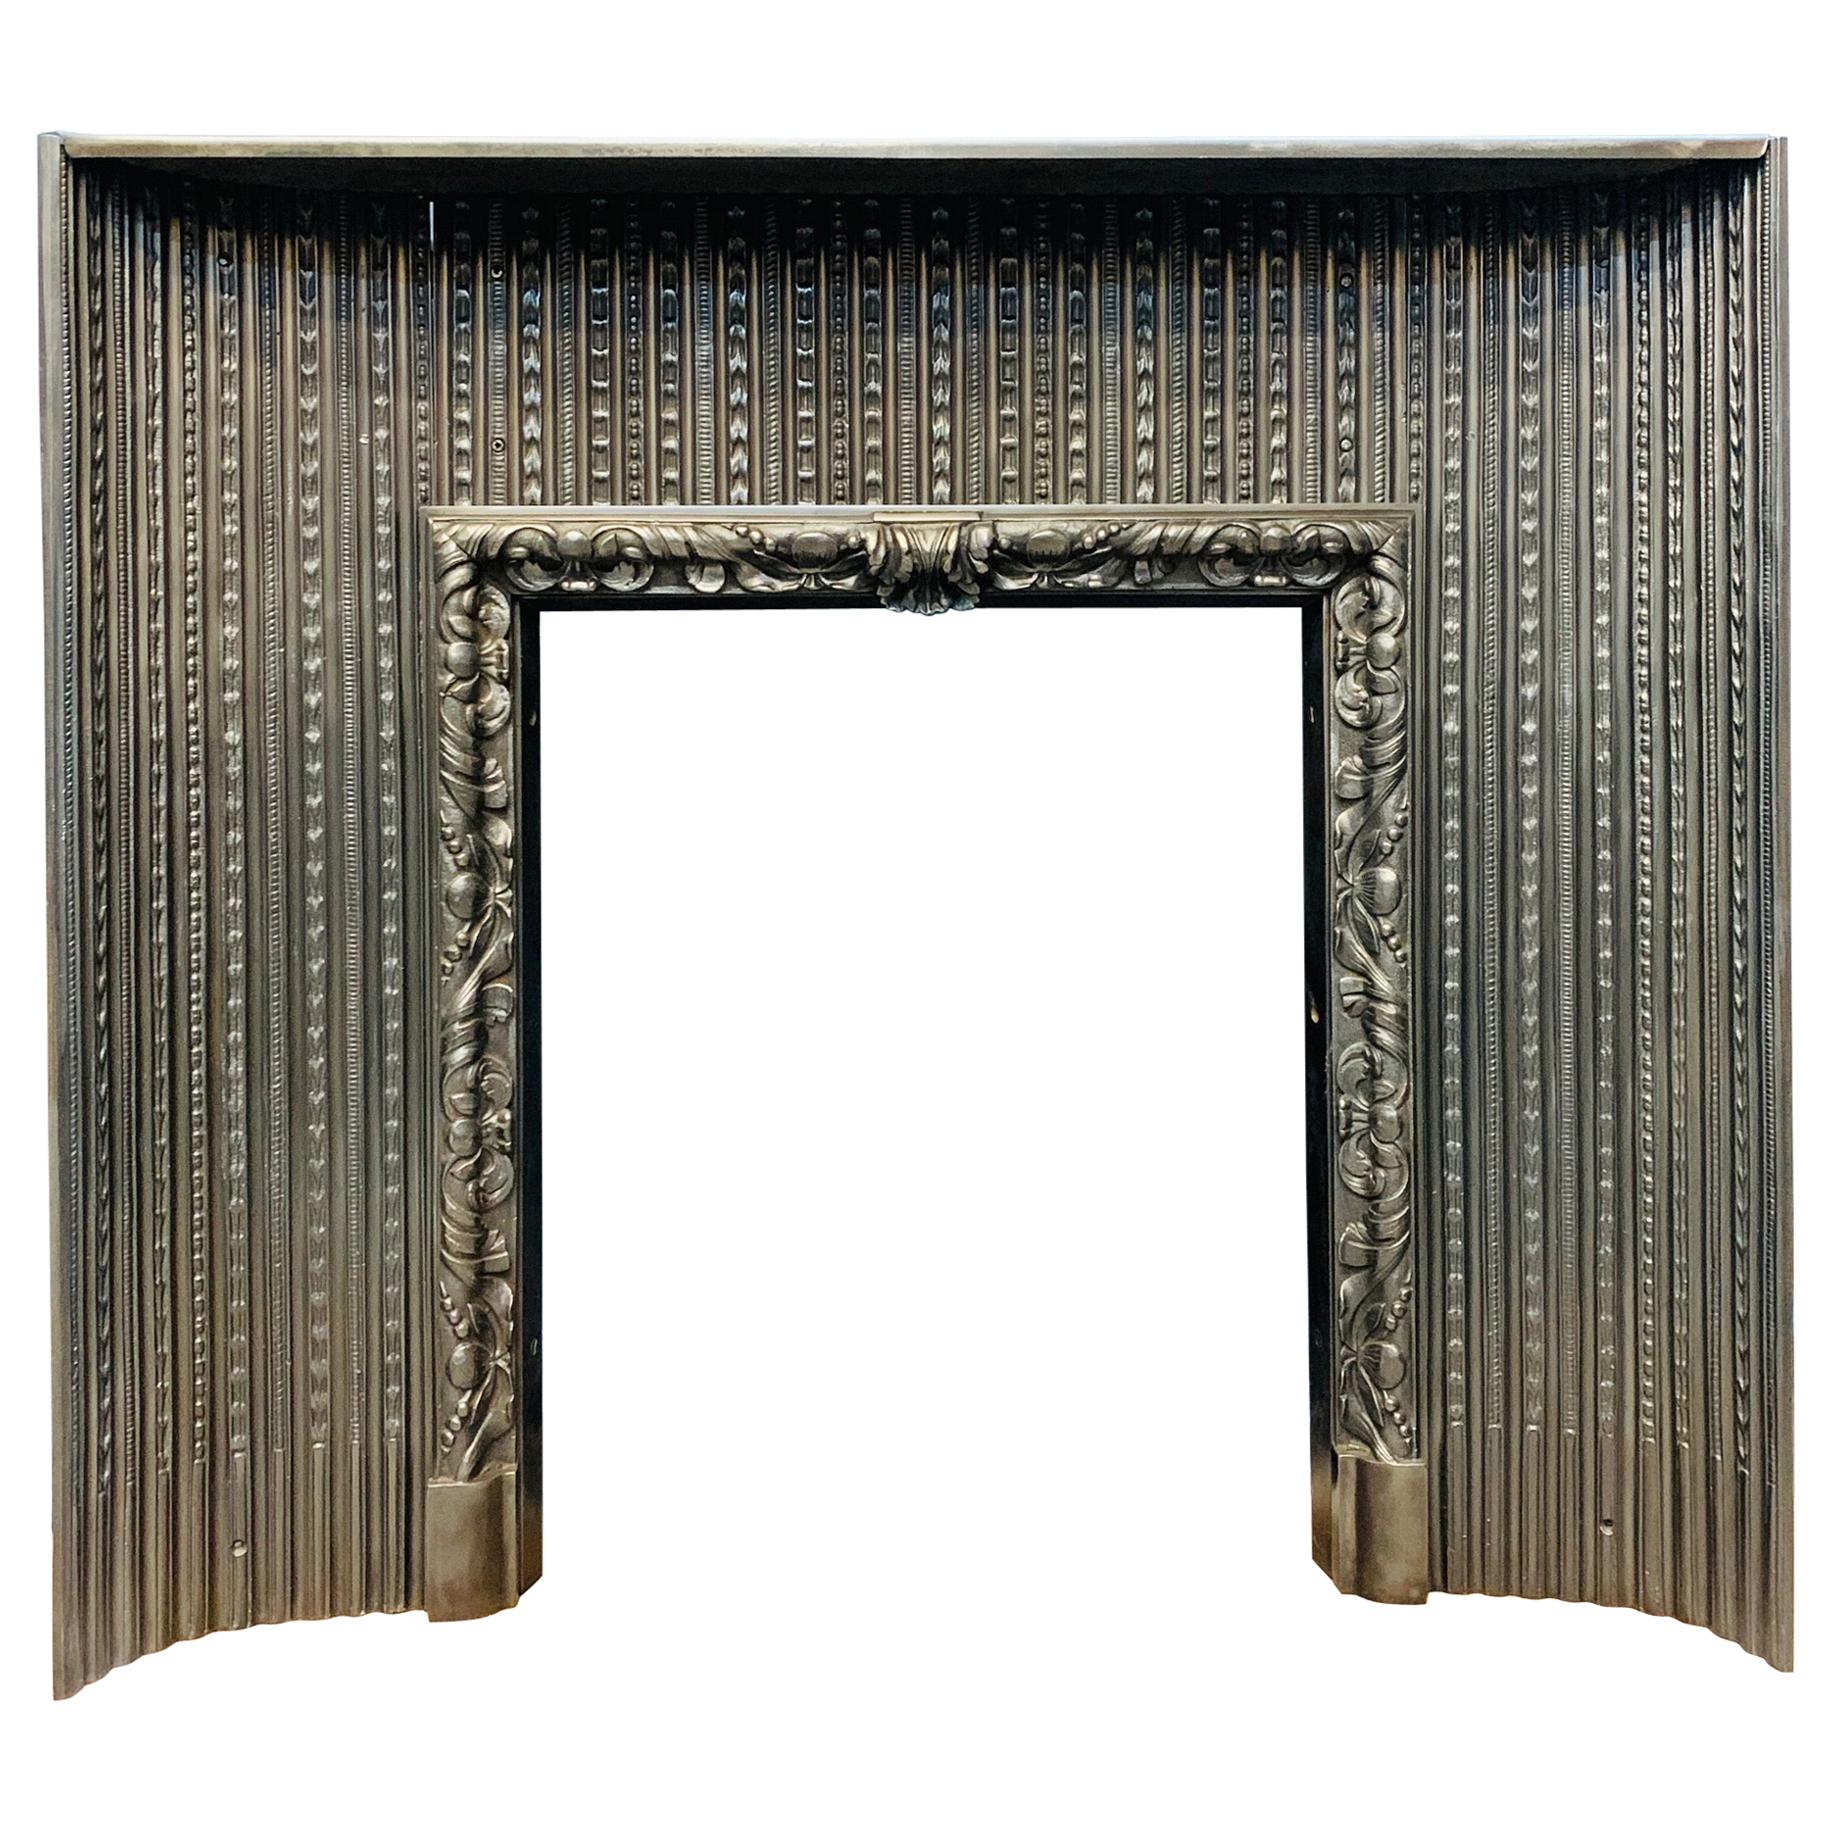 Early 19th Century Regency Acanthus Cast Iron Fireplace Insert